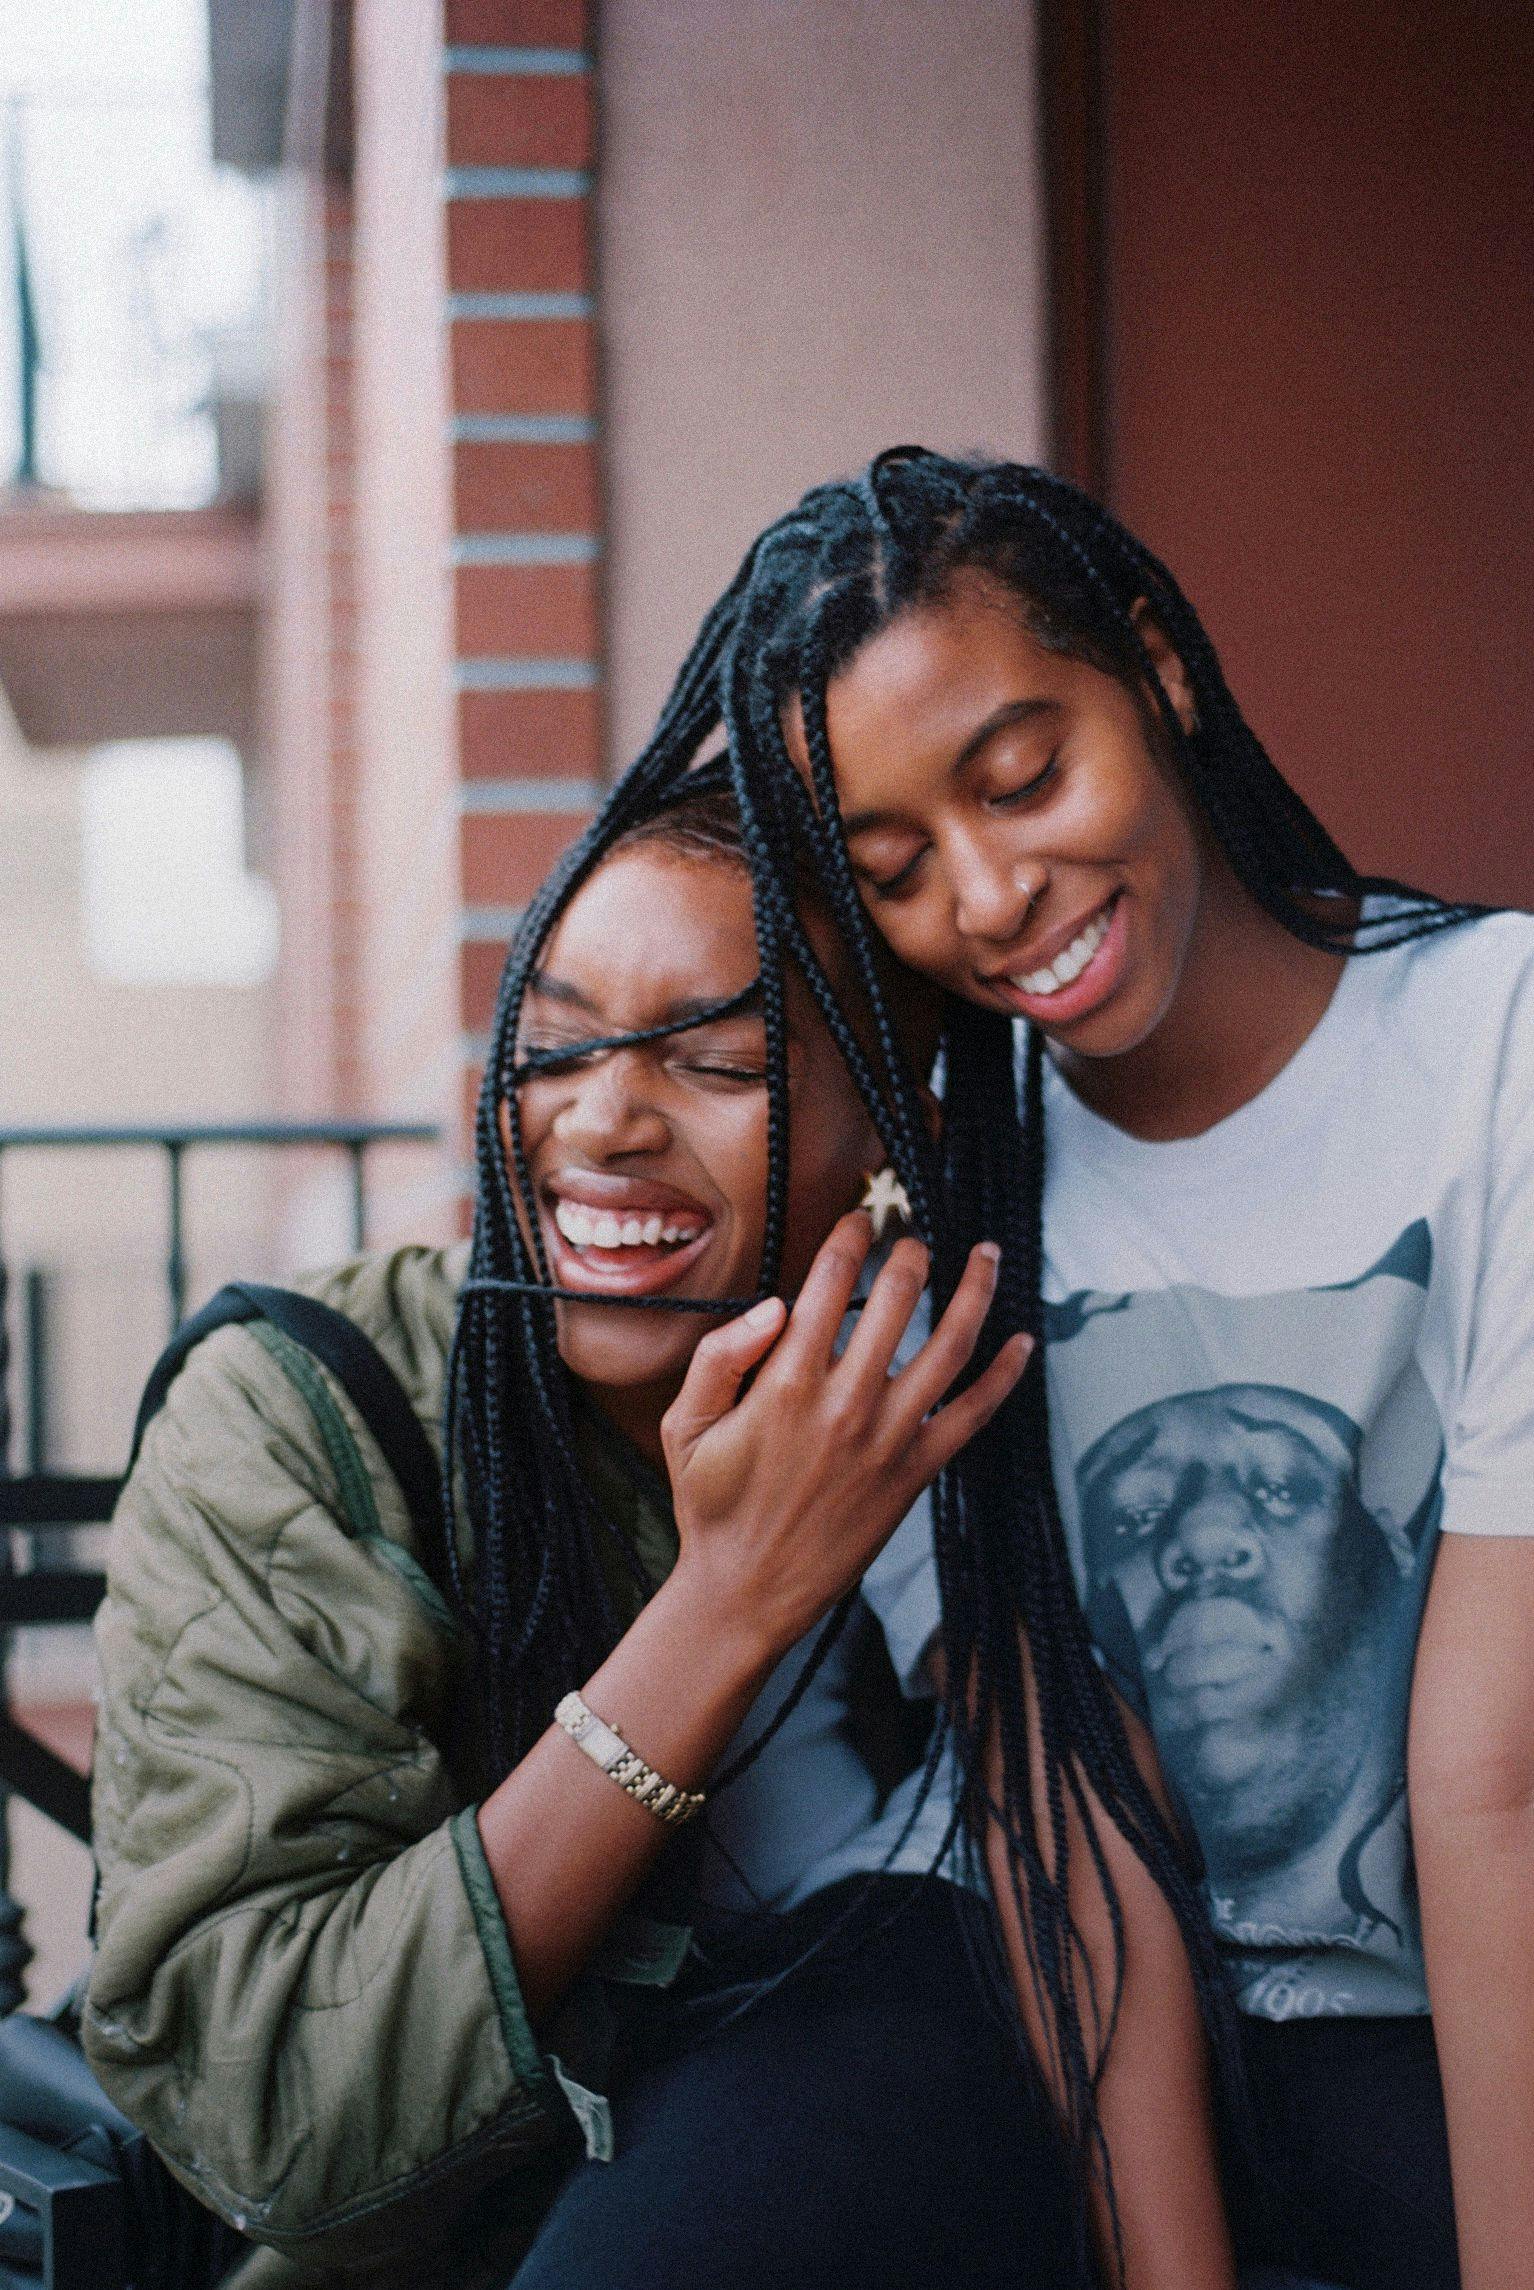 Girls with braids laughing together